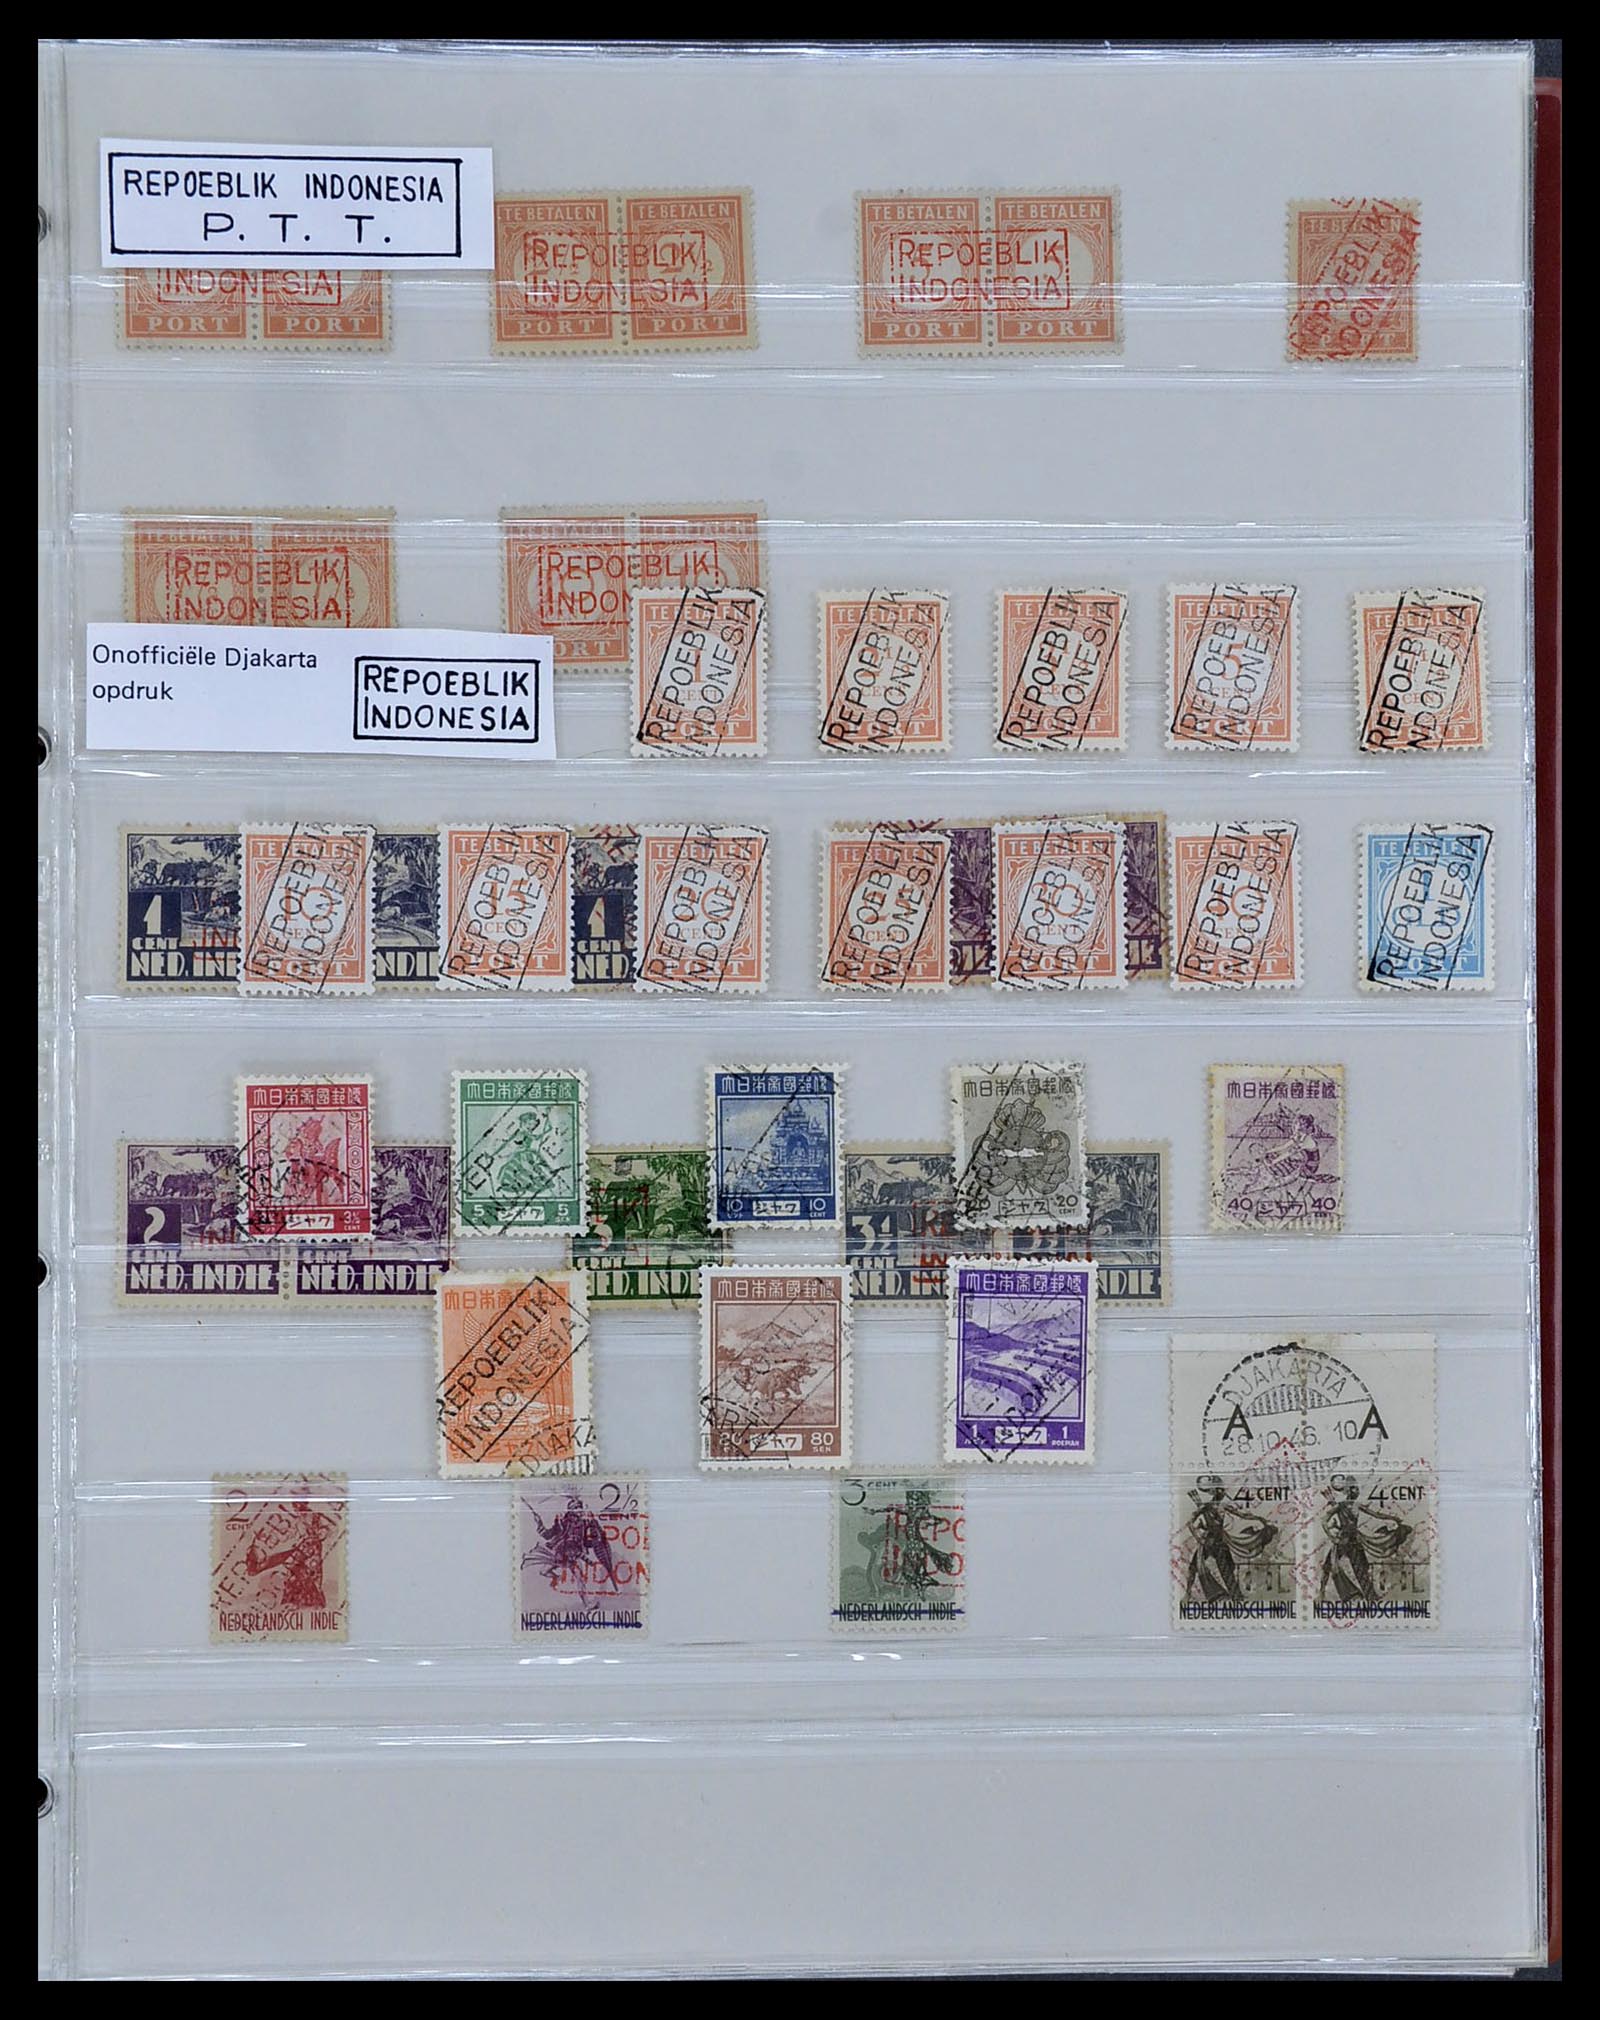 34545 064 - Stamp Collection 34545 Japanese Occupation of the Dutch East Indies and 